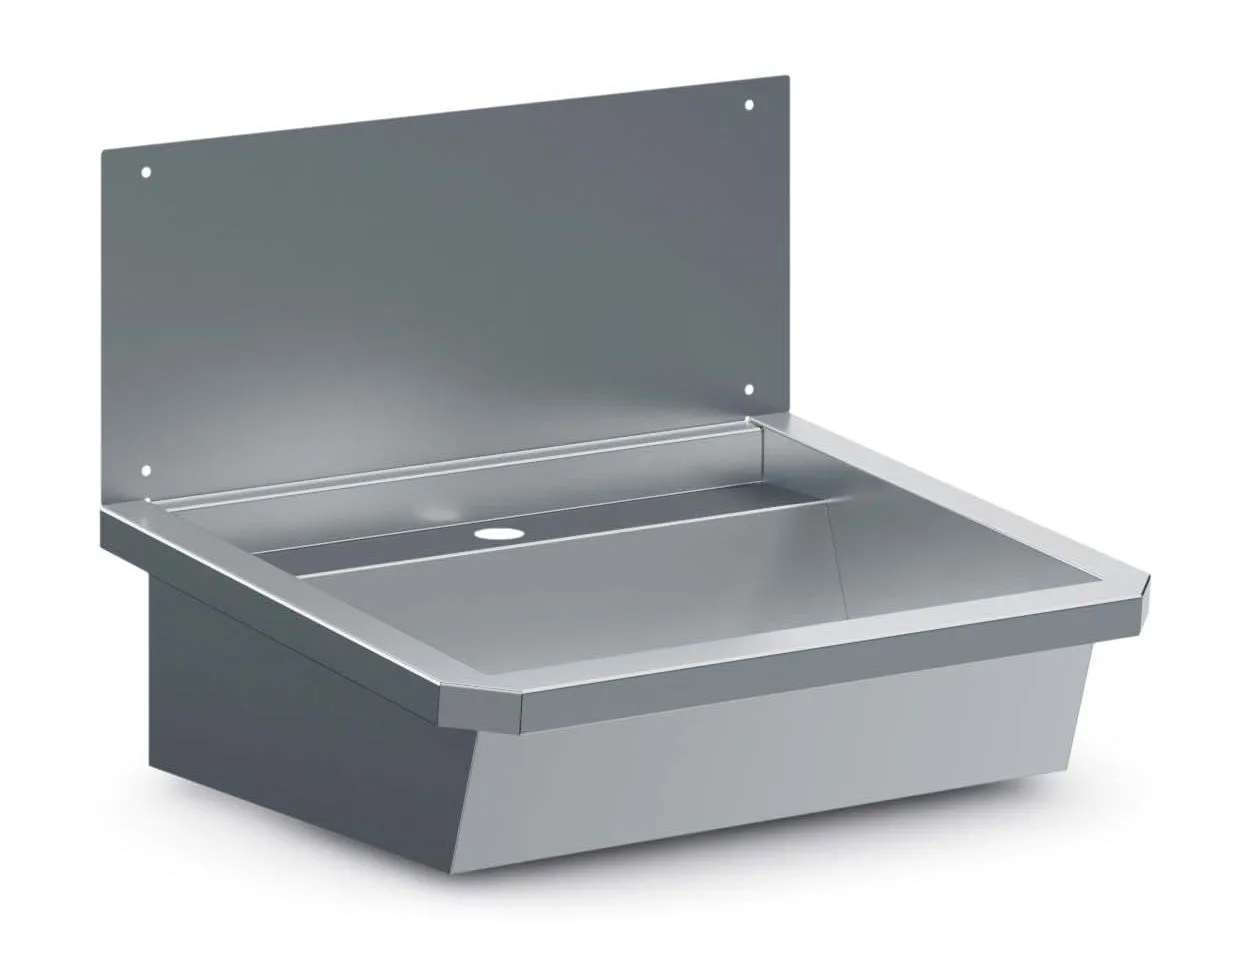 CombiSteel Stainless steel Wash Basin 1 Tap 600MM Drain Plug And Splash Shield Included